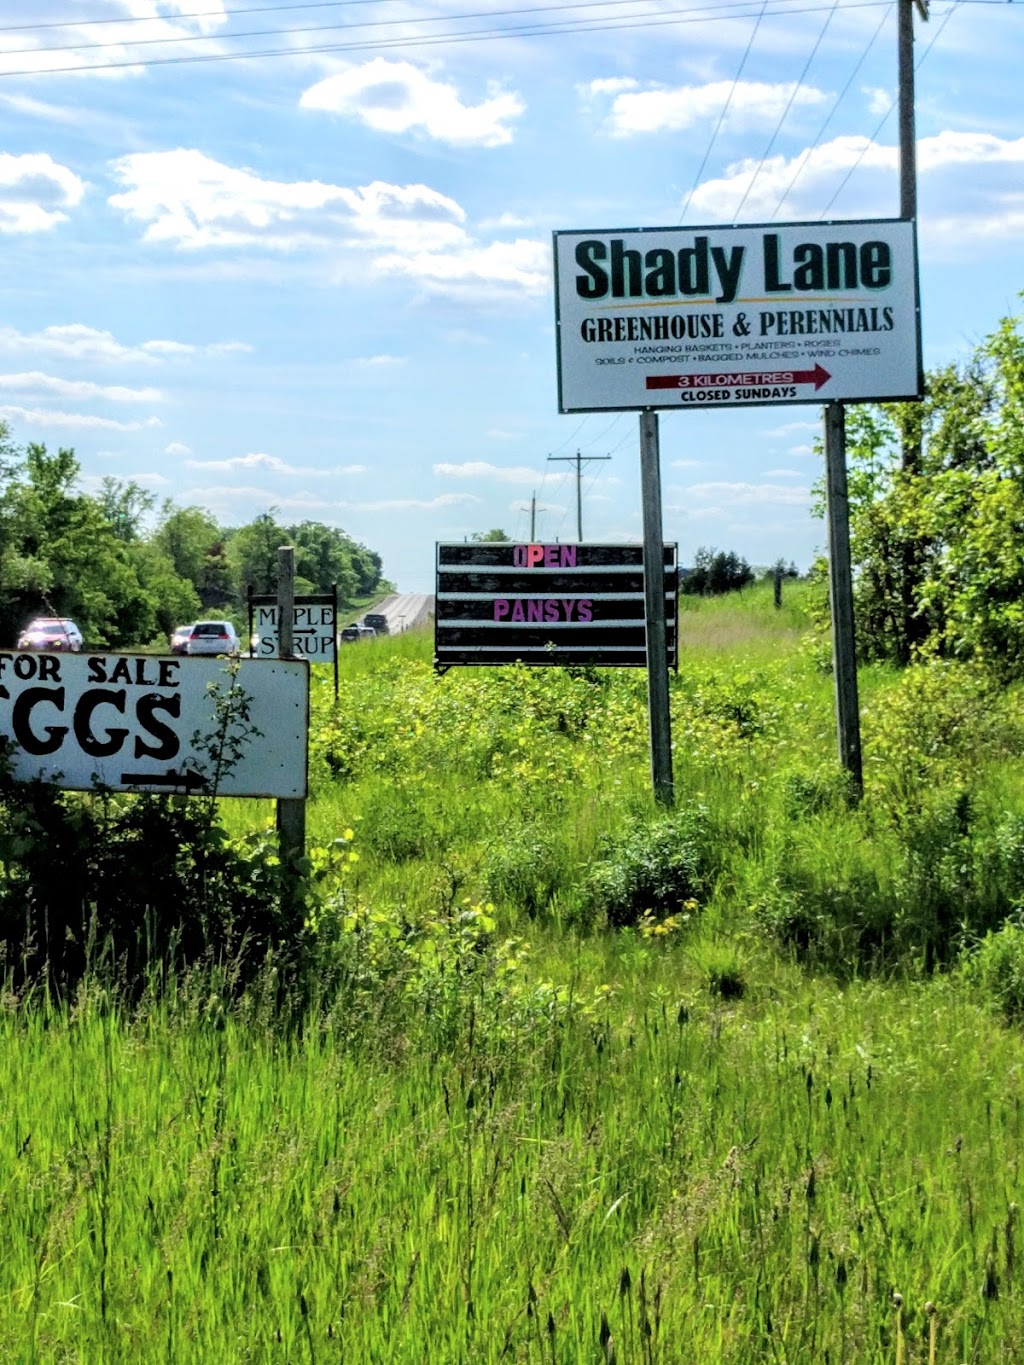 Shady Lanes Greenhouse & Perenials | point of interest | 6158 Weisenberg Rd, West Montrose, ON N0B 2V0, Canada | 5198462972 OR +1 519-846-2972